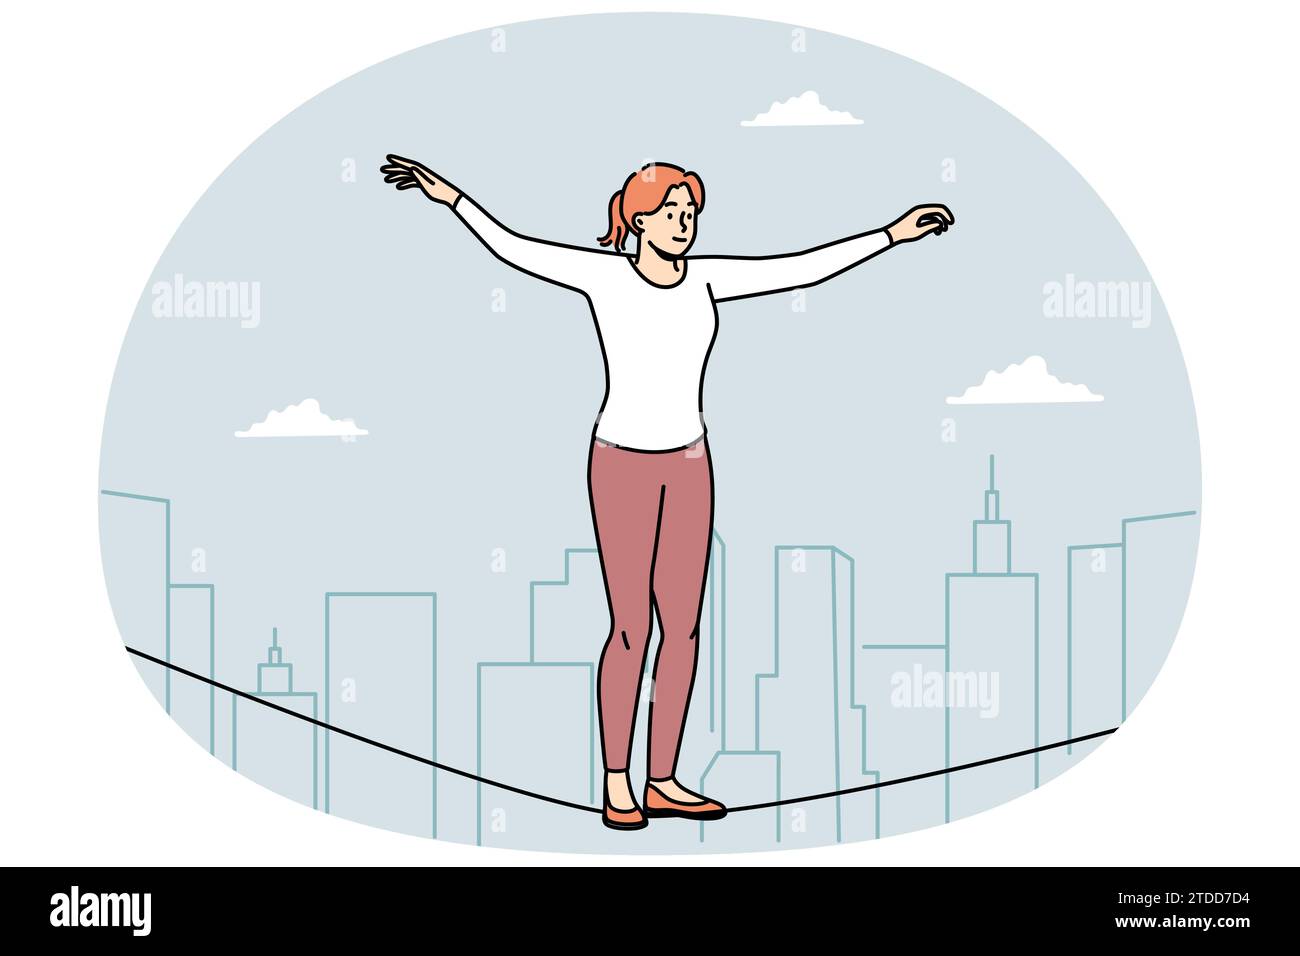 Young woman equilibrist walking on rope in air. Female walker engaged in extreme sportive physical activity. Hobby concept. Vector illustration. Stock Vector